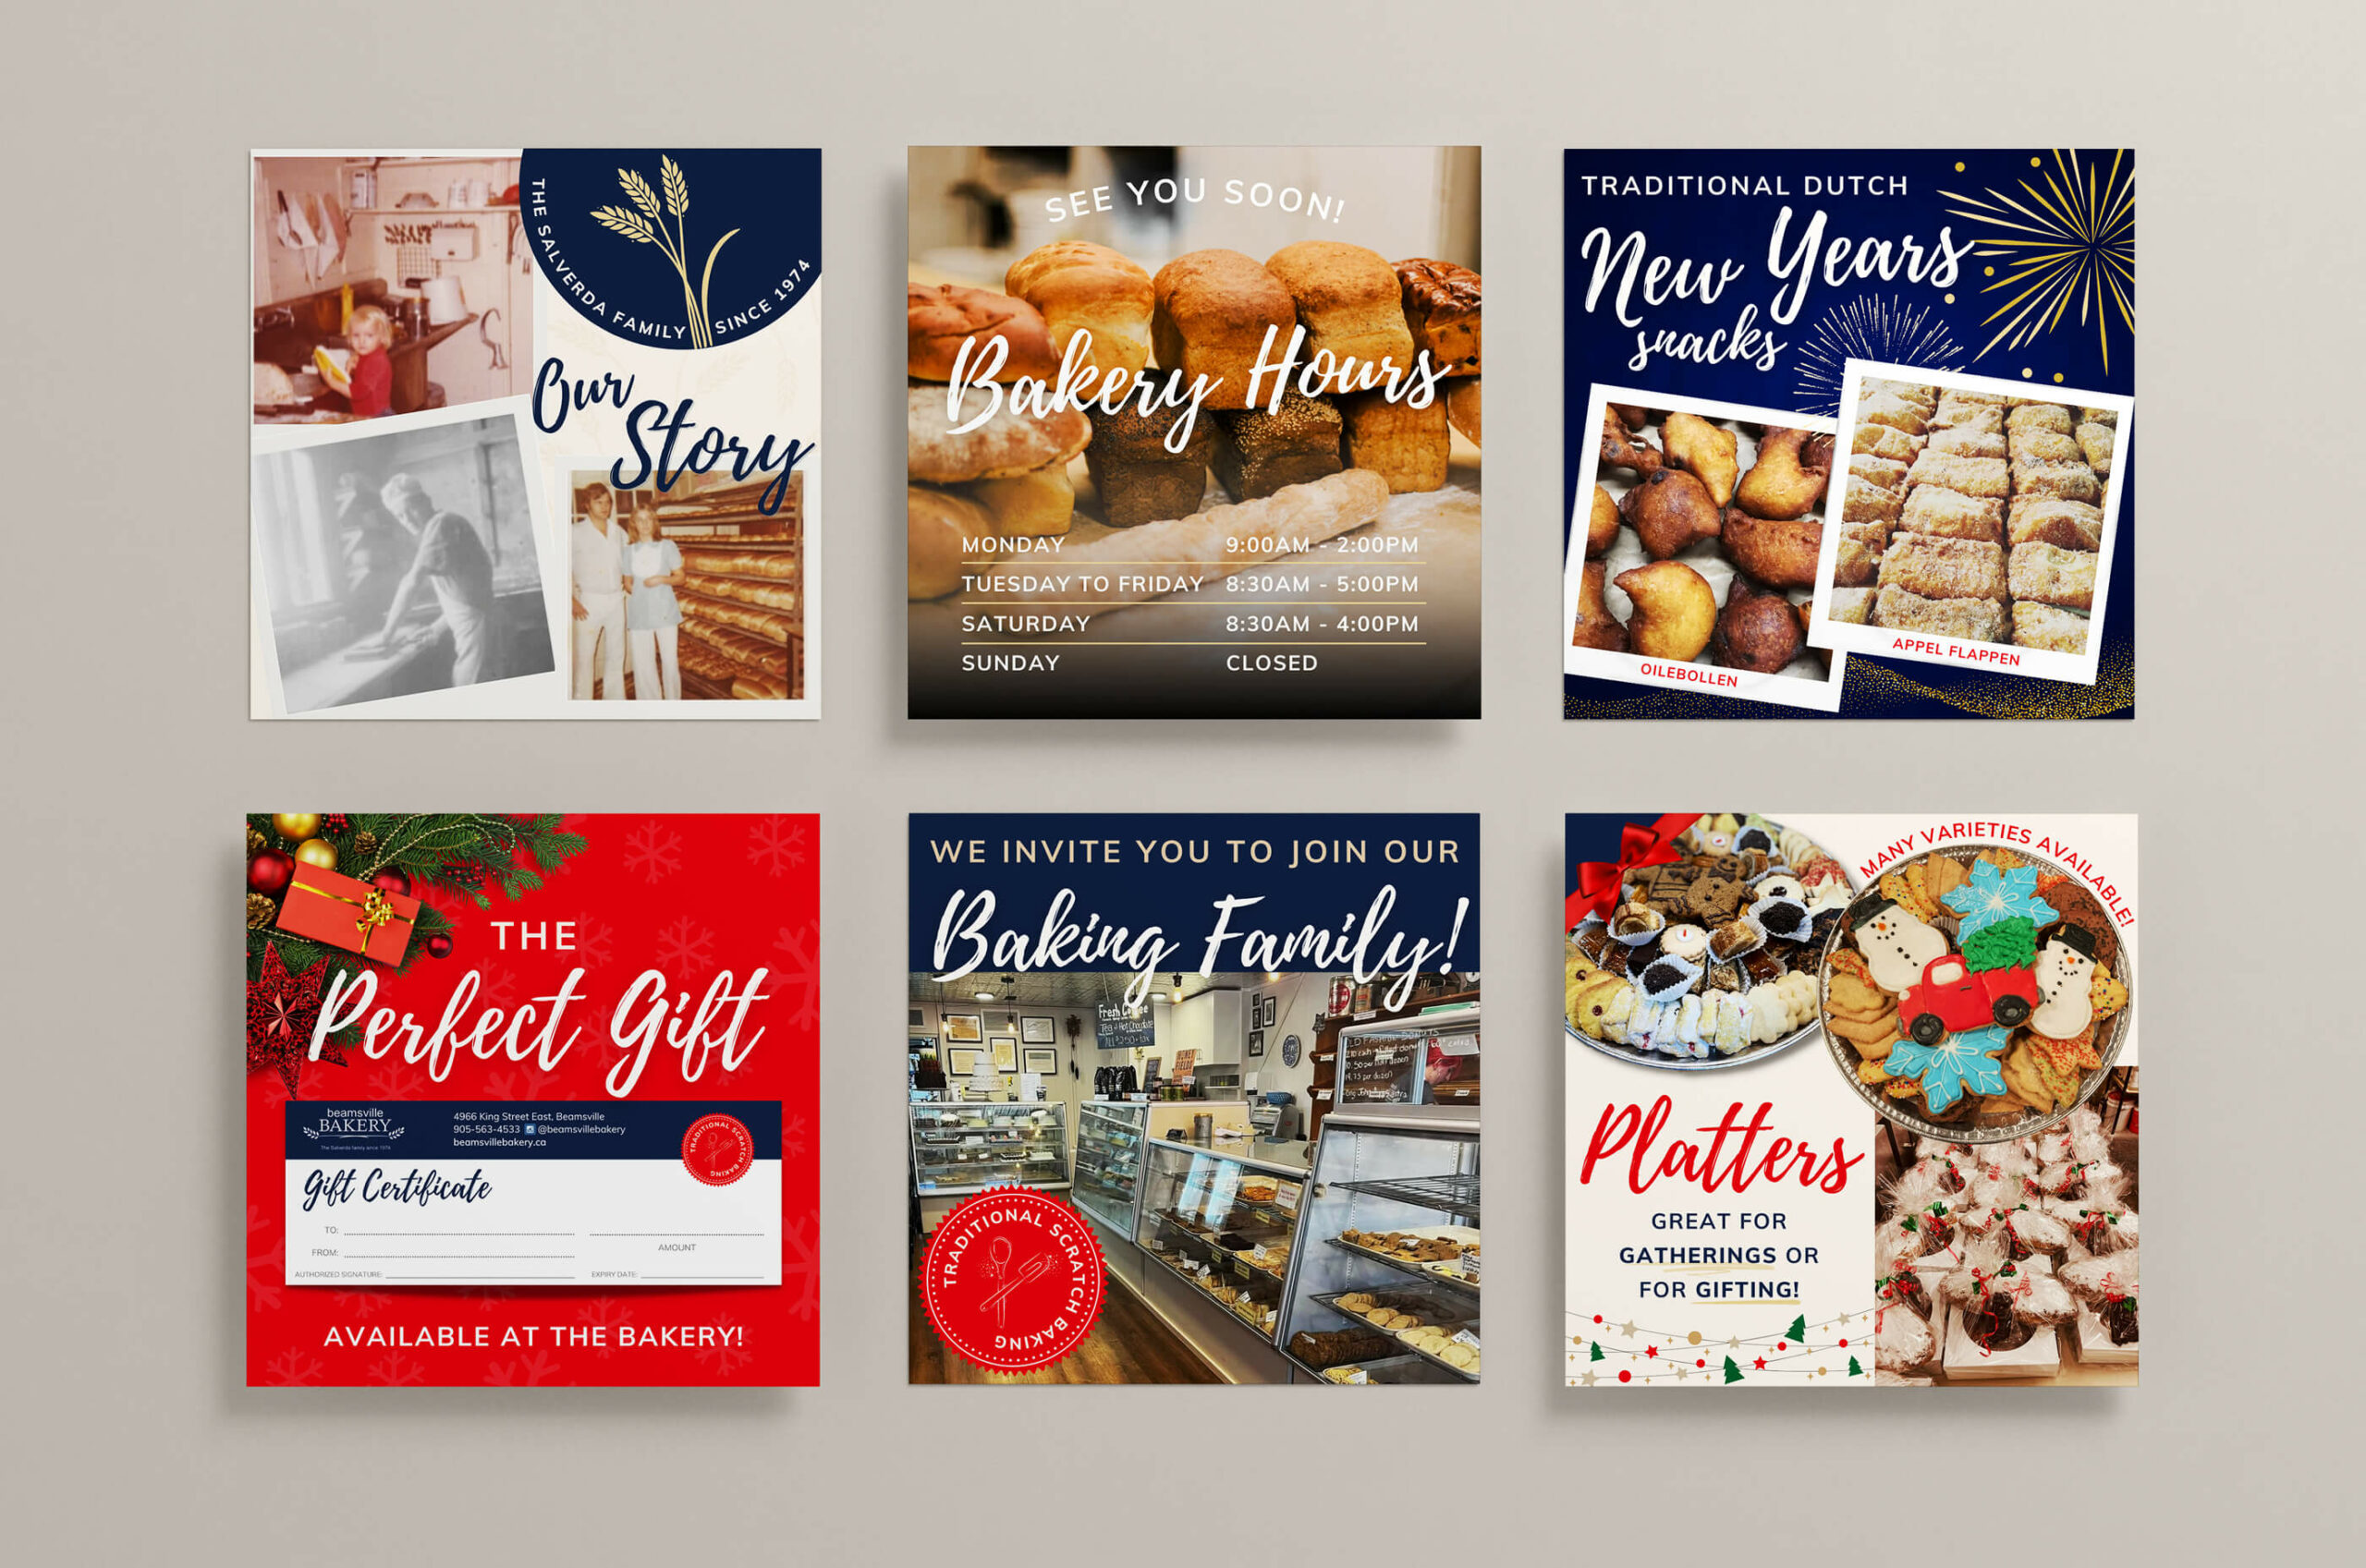 Digital Marketing and Print Designs by Tulip Tree Creative for Beamsville Bakery